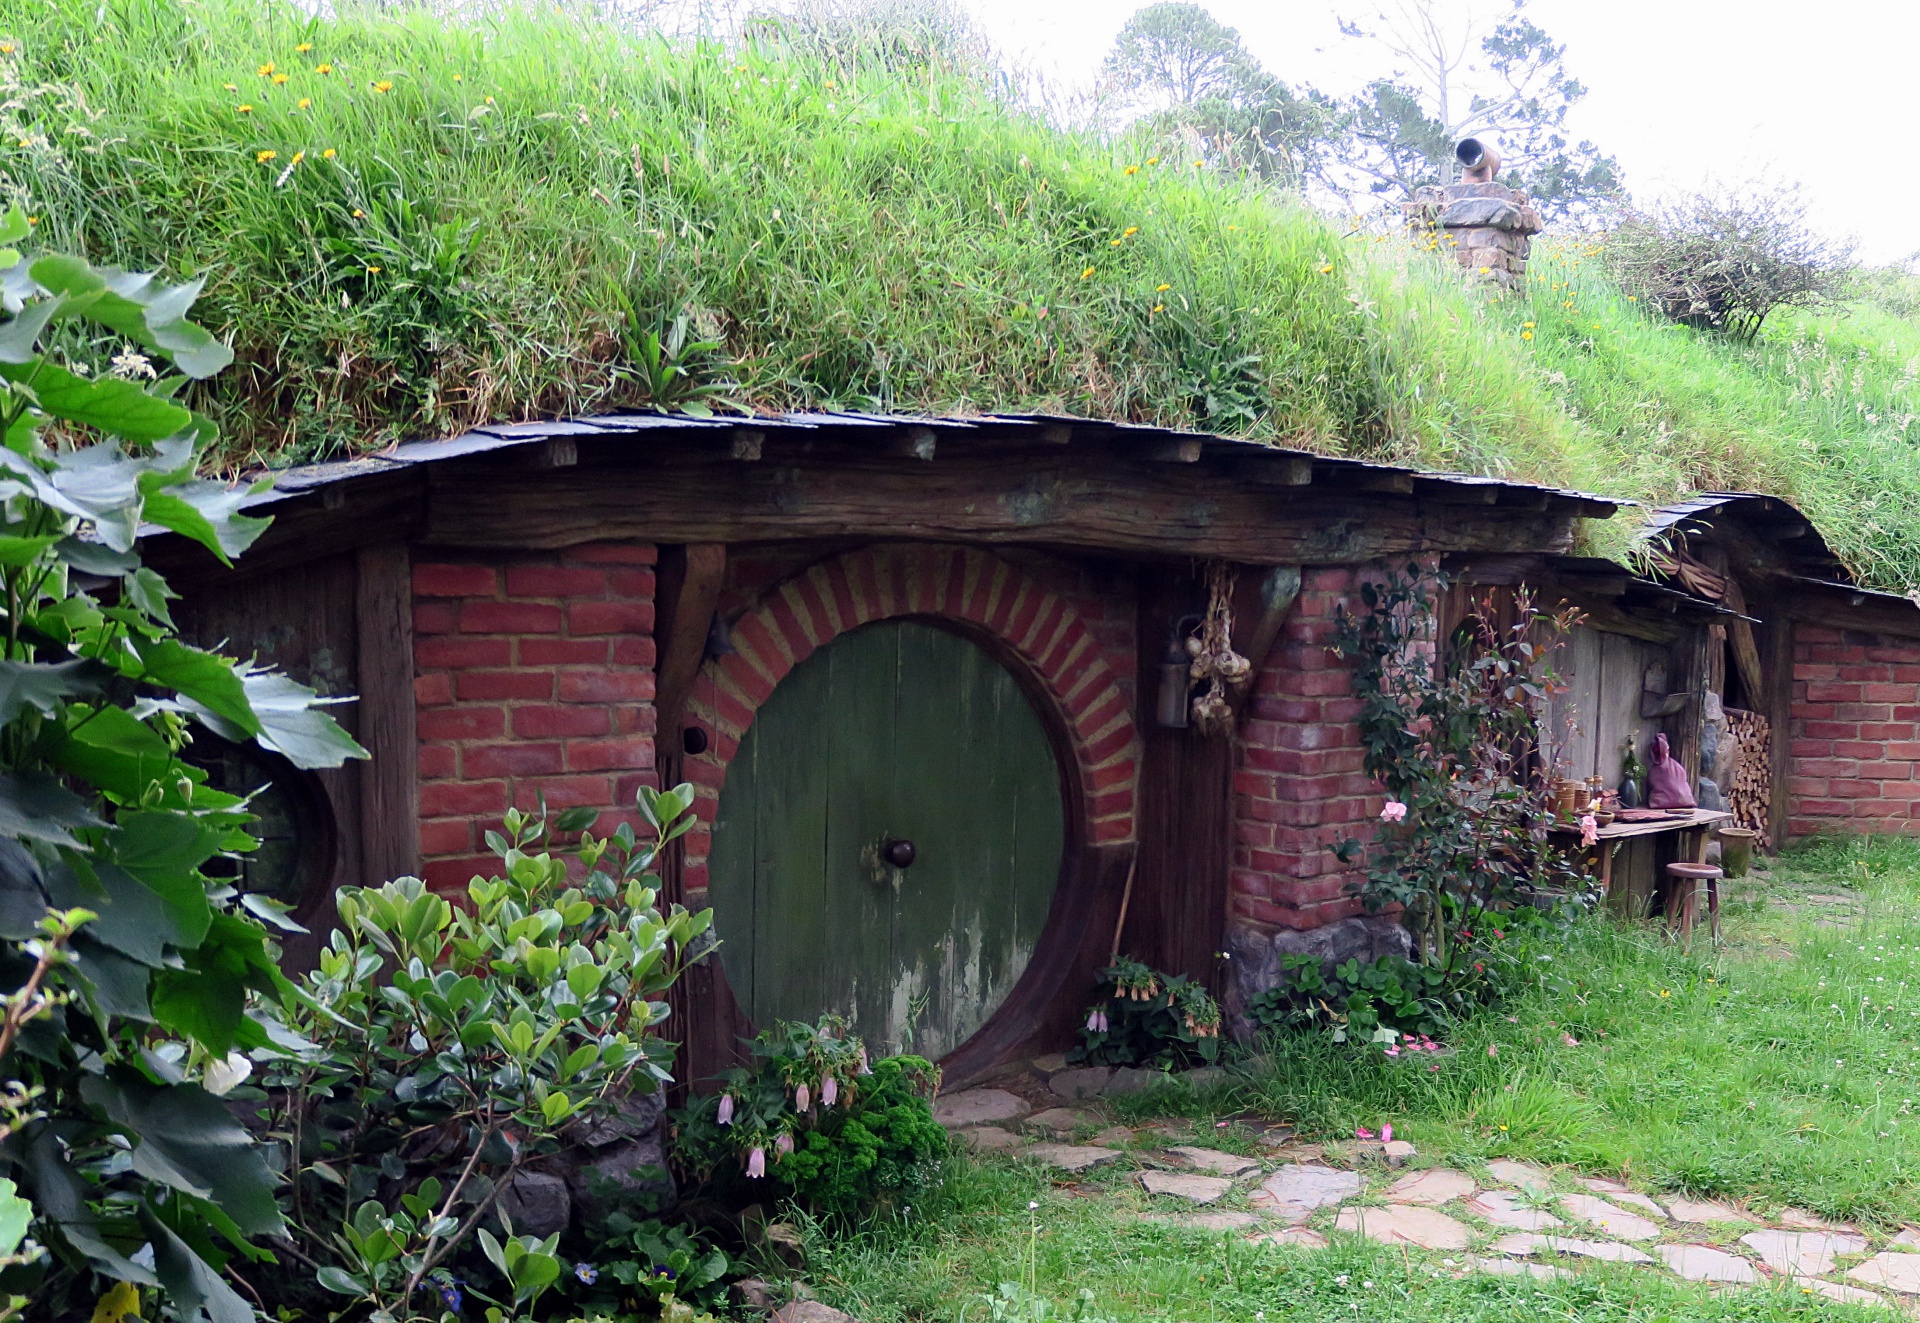 Hobbit Hole from the Set